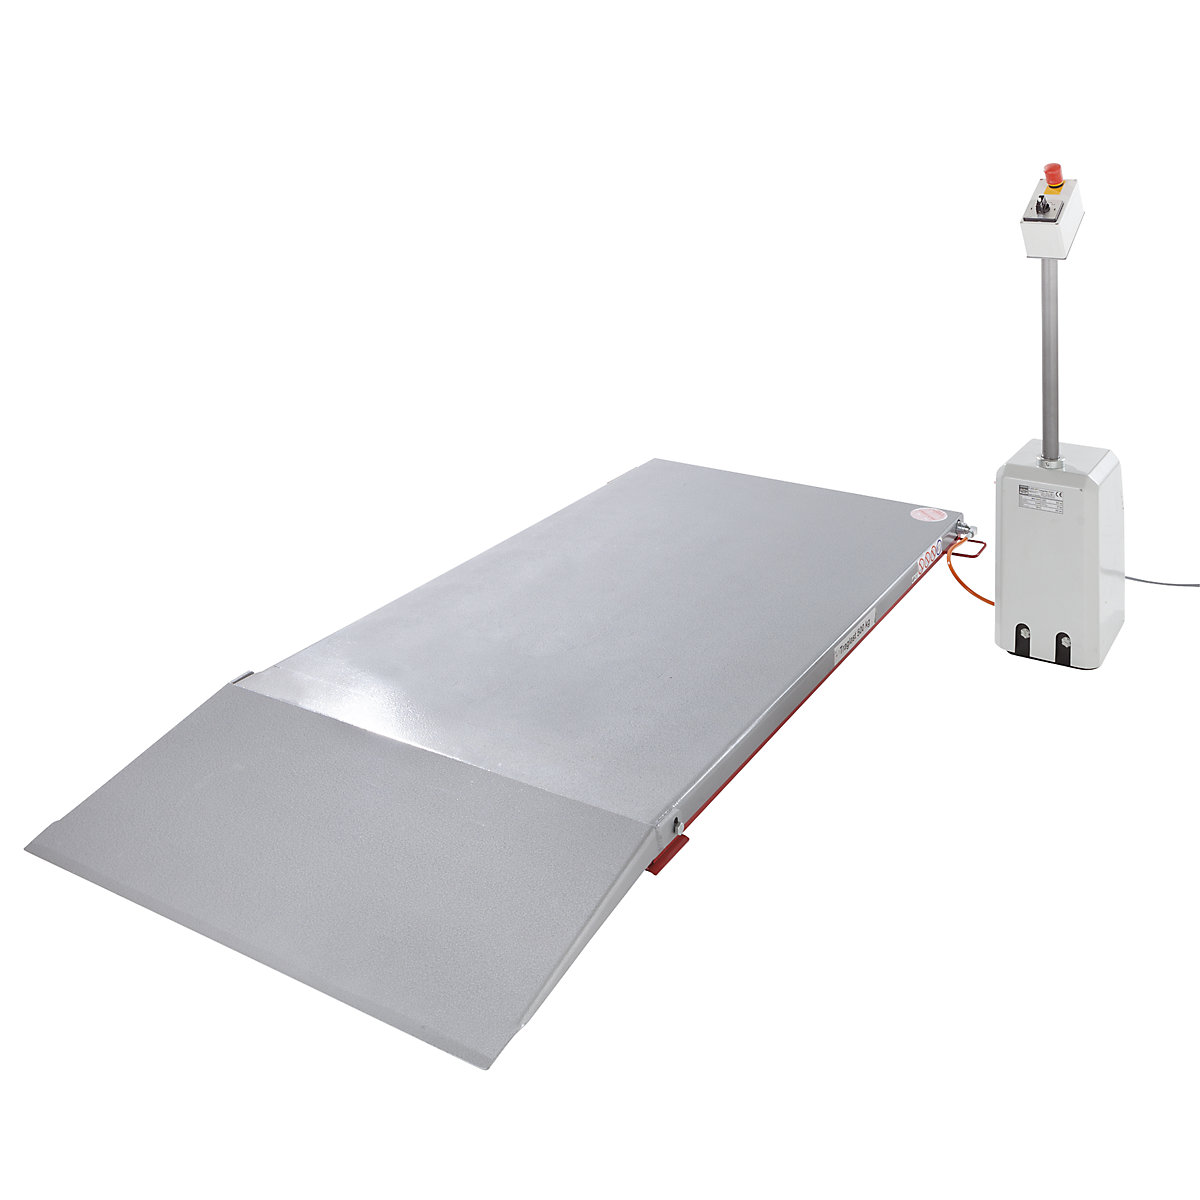 Low profile lift table, G series – Flexlift (Product illustration 4)